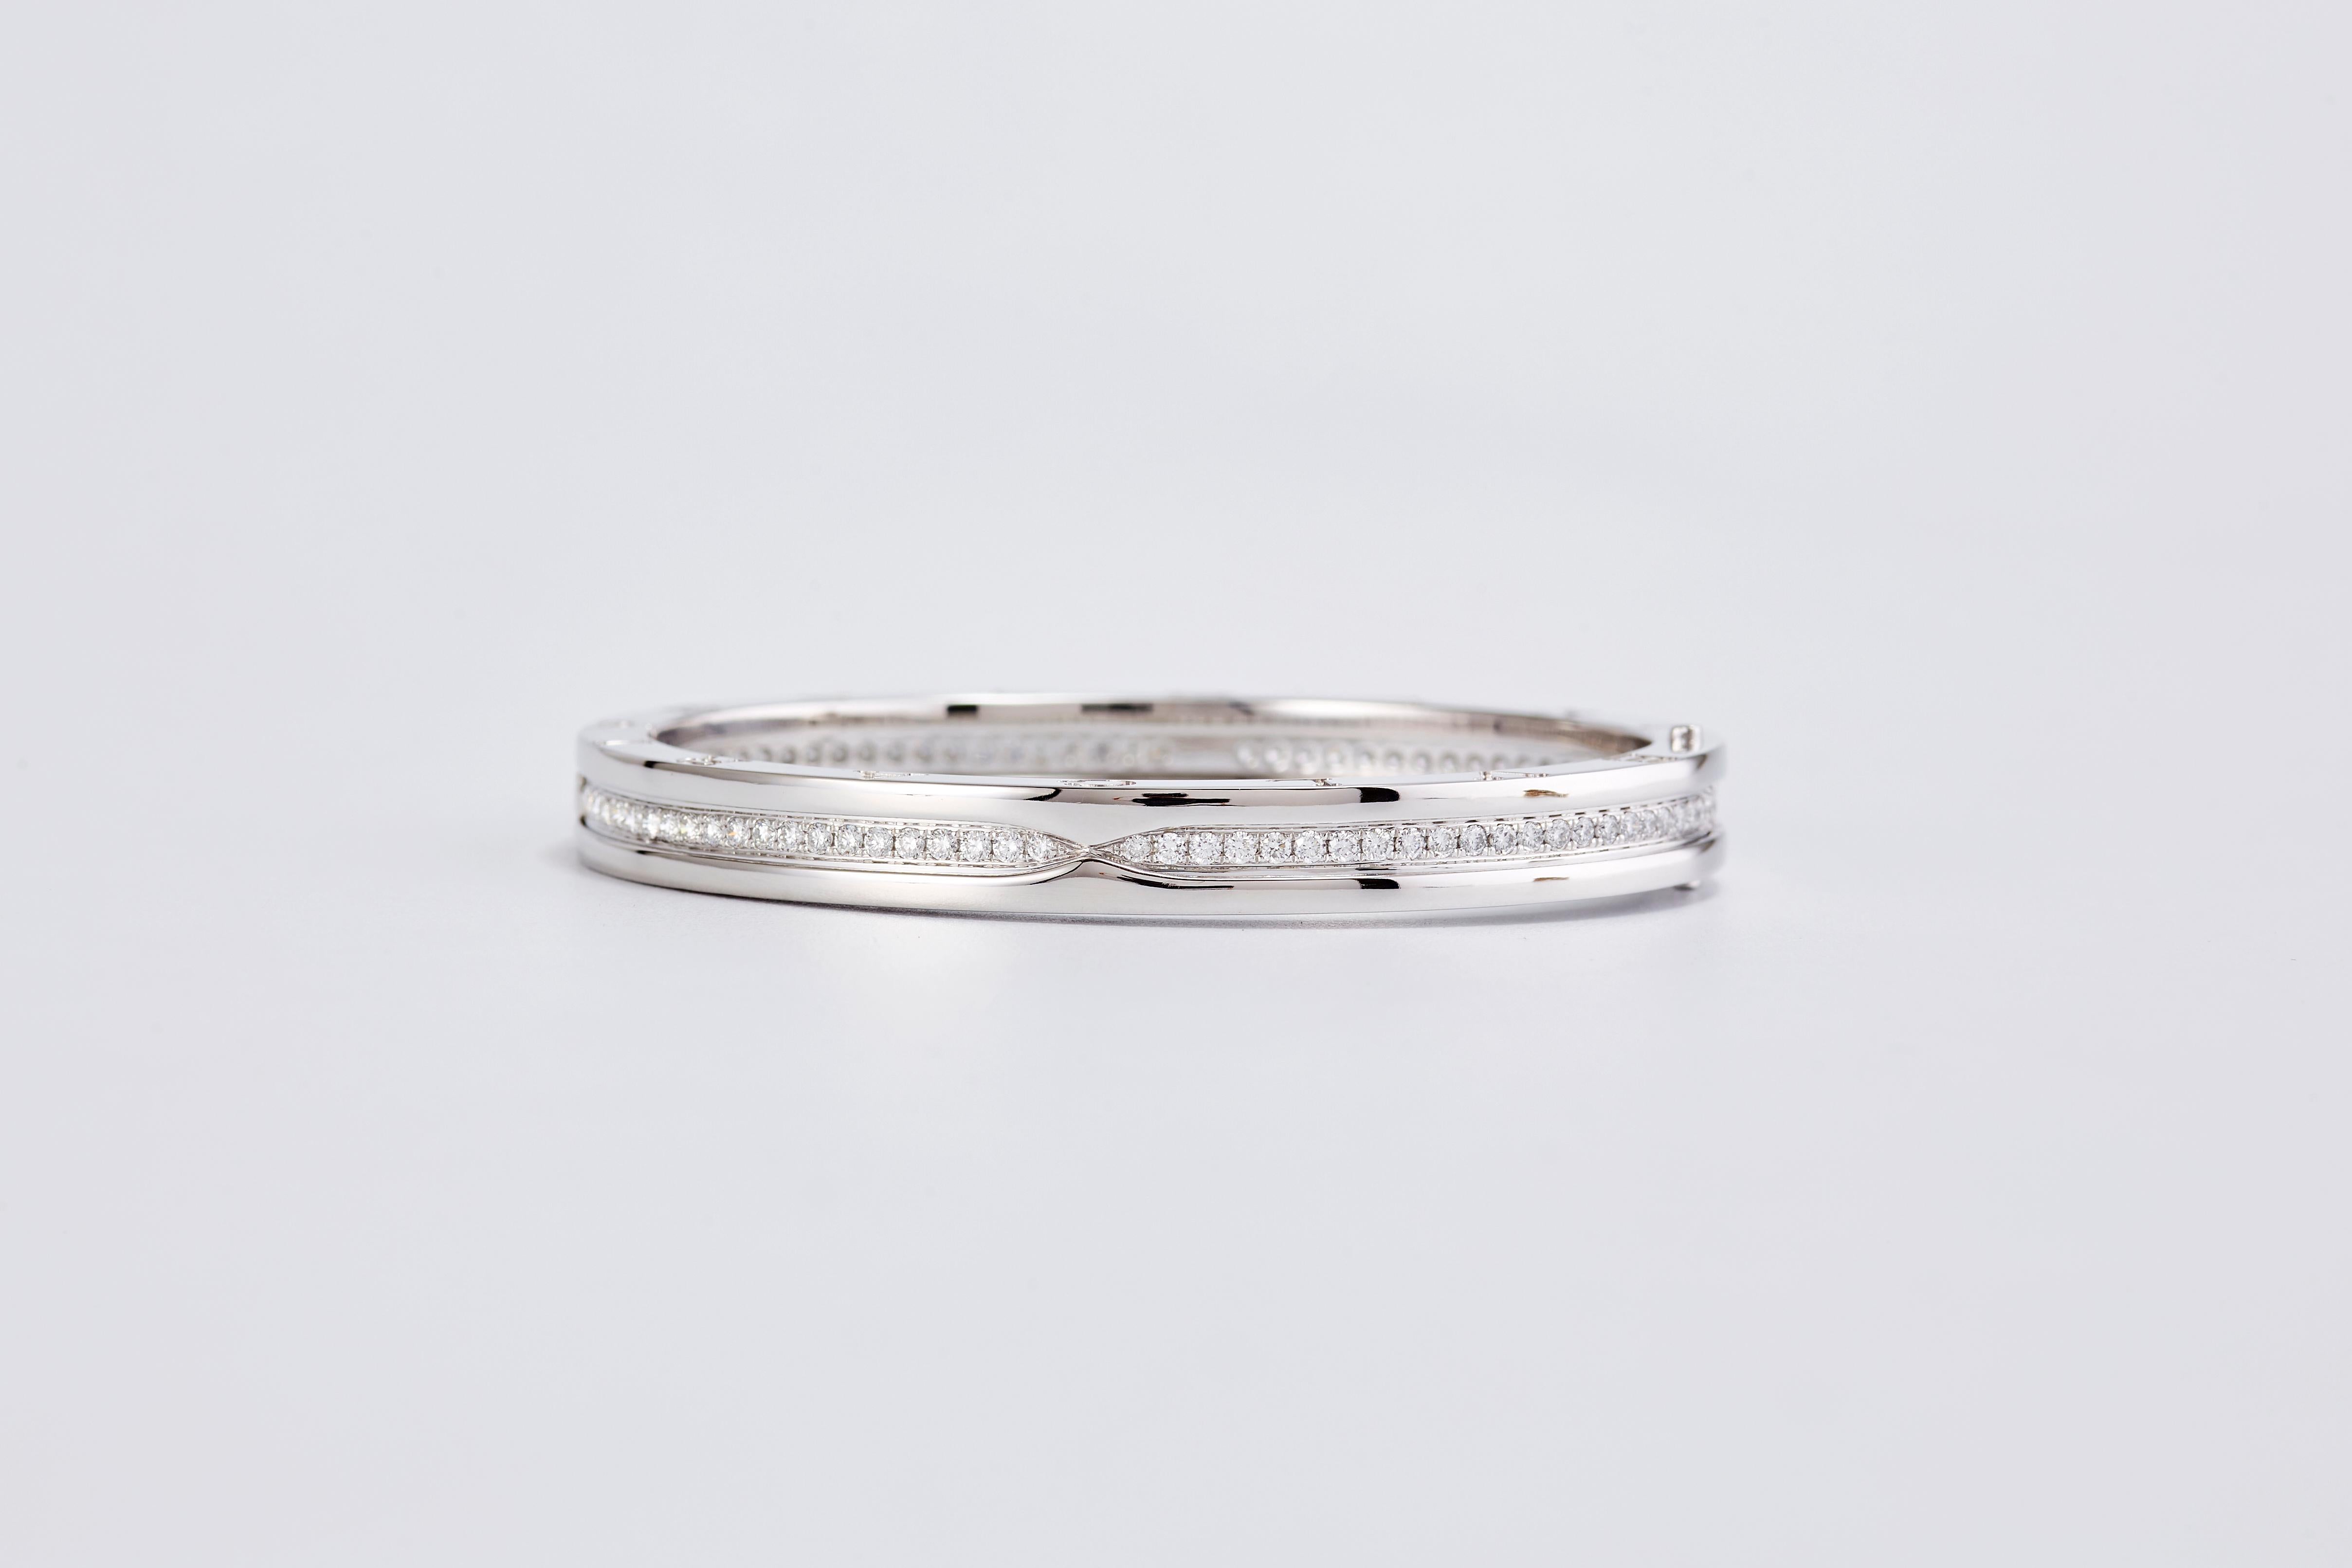 Bulgari B.zero1 Diamond White Gold Bracelet

This fabulous bangle from Bulgari's iconic B.zero1 collection is crafted in 18k white gold, engraved with the Bvlgari logo on both sides and pave-set with sparkling brilliant-cut round F-G VVS2-VS1